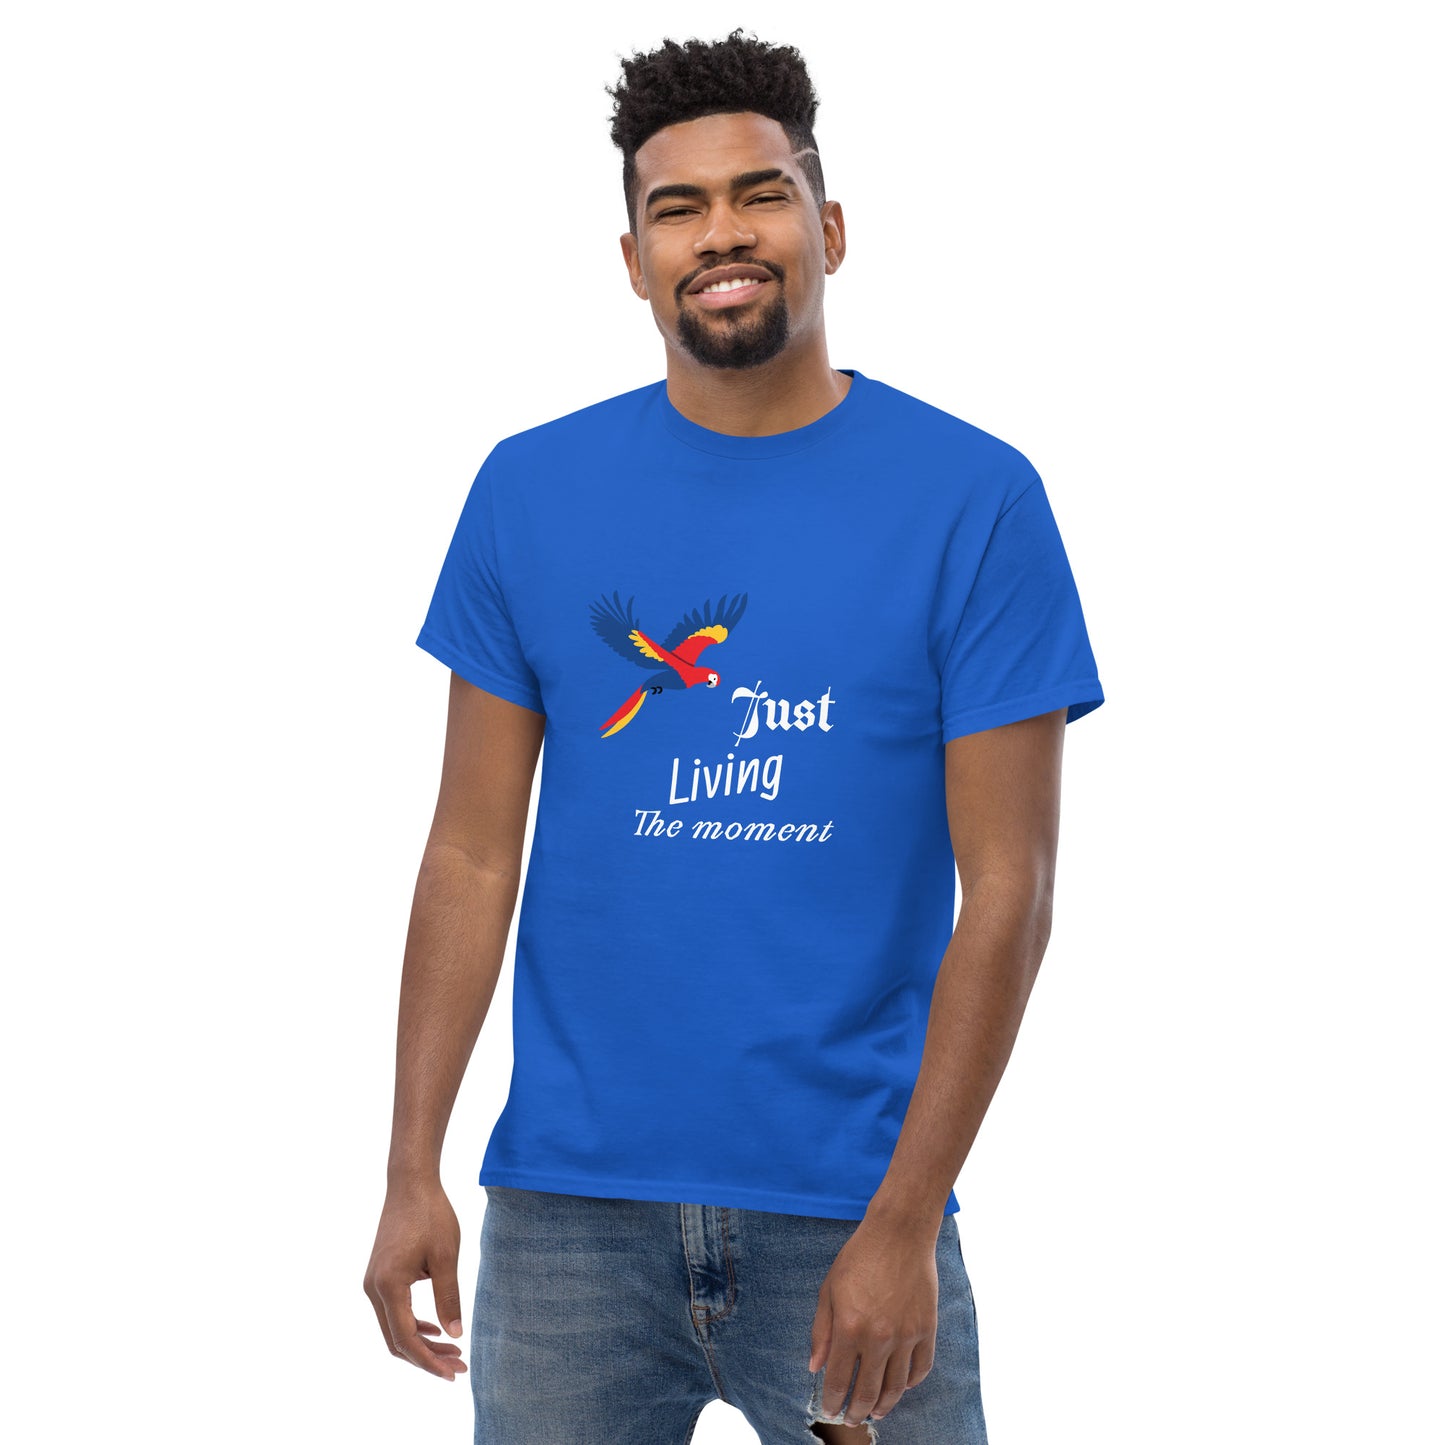 Inspirational Men's Tee, "Just Living The Moment", Fashion With Meaning